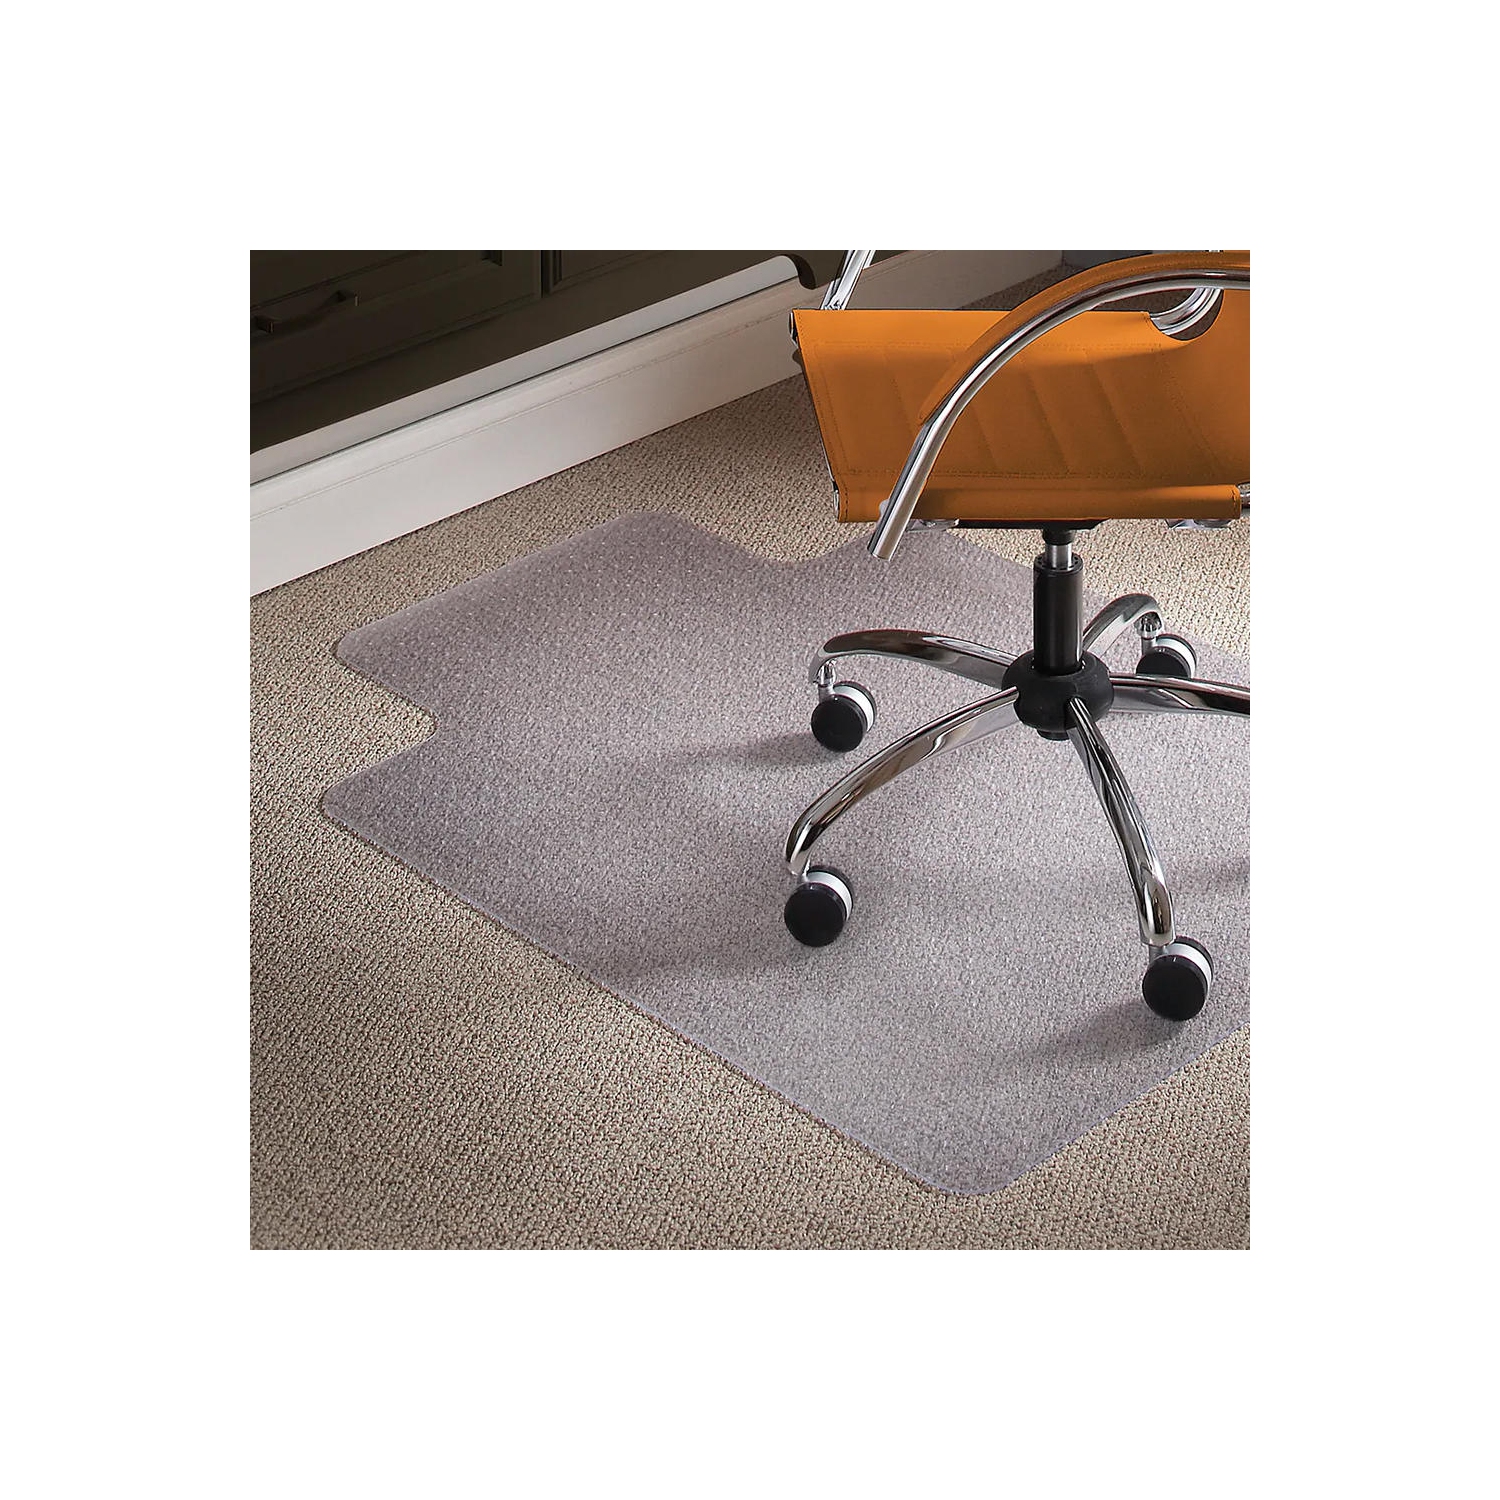 30" x 48" Chair Mat for Carpets, Transparent Carpet Protector Office Chair Mat with Lip Anti-Slip Spiked for Hard Surface Floors